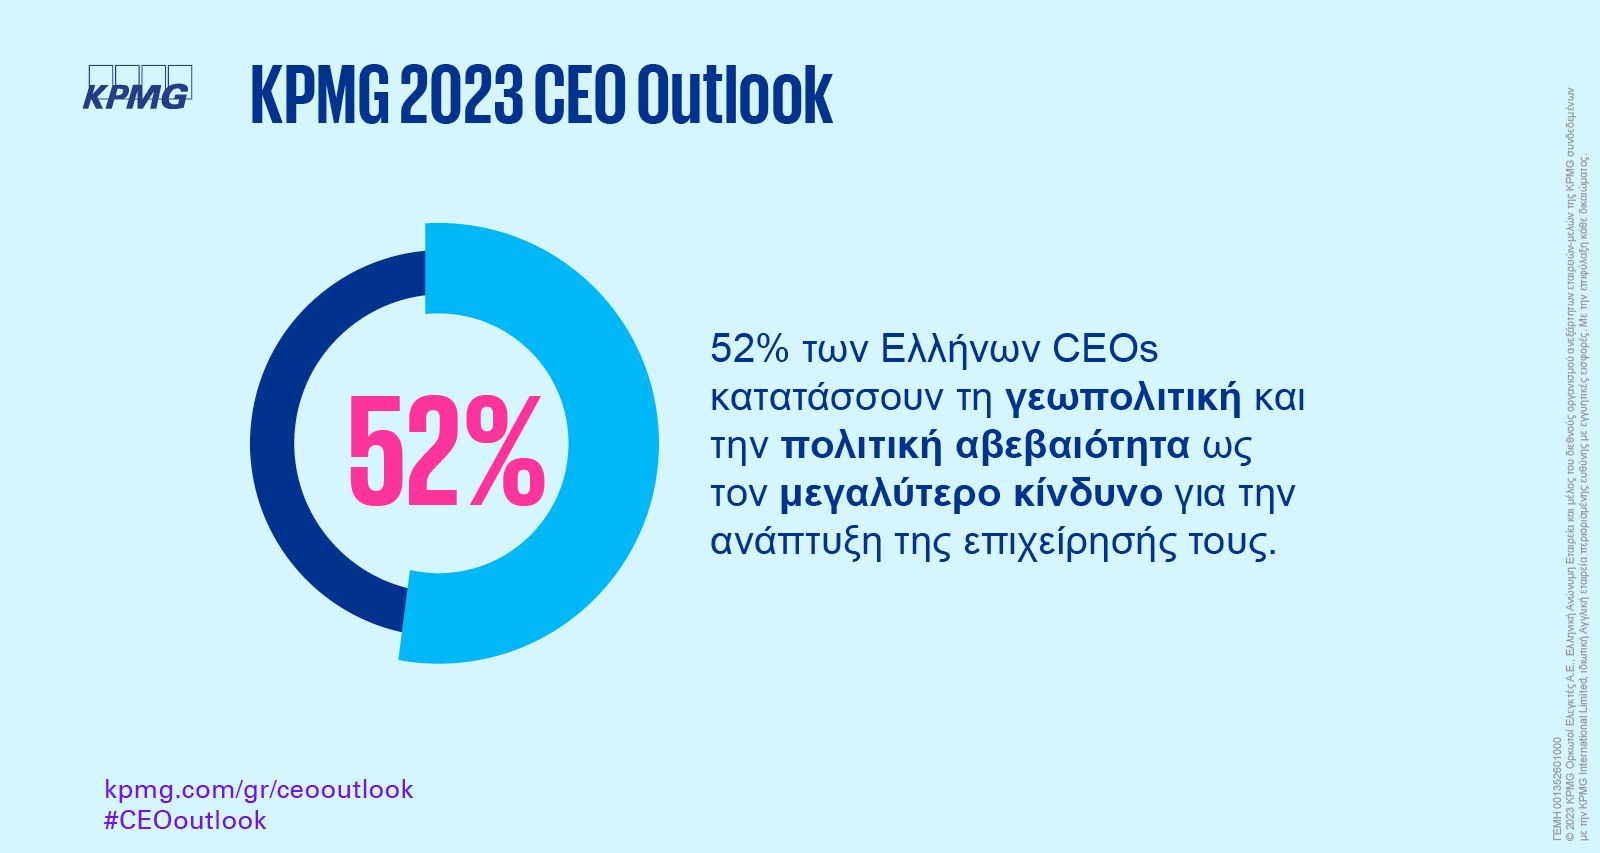 2023 ceo outlook infographic